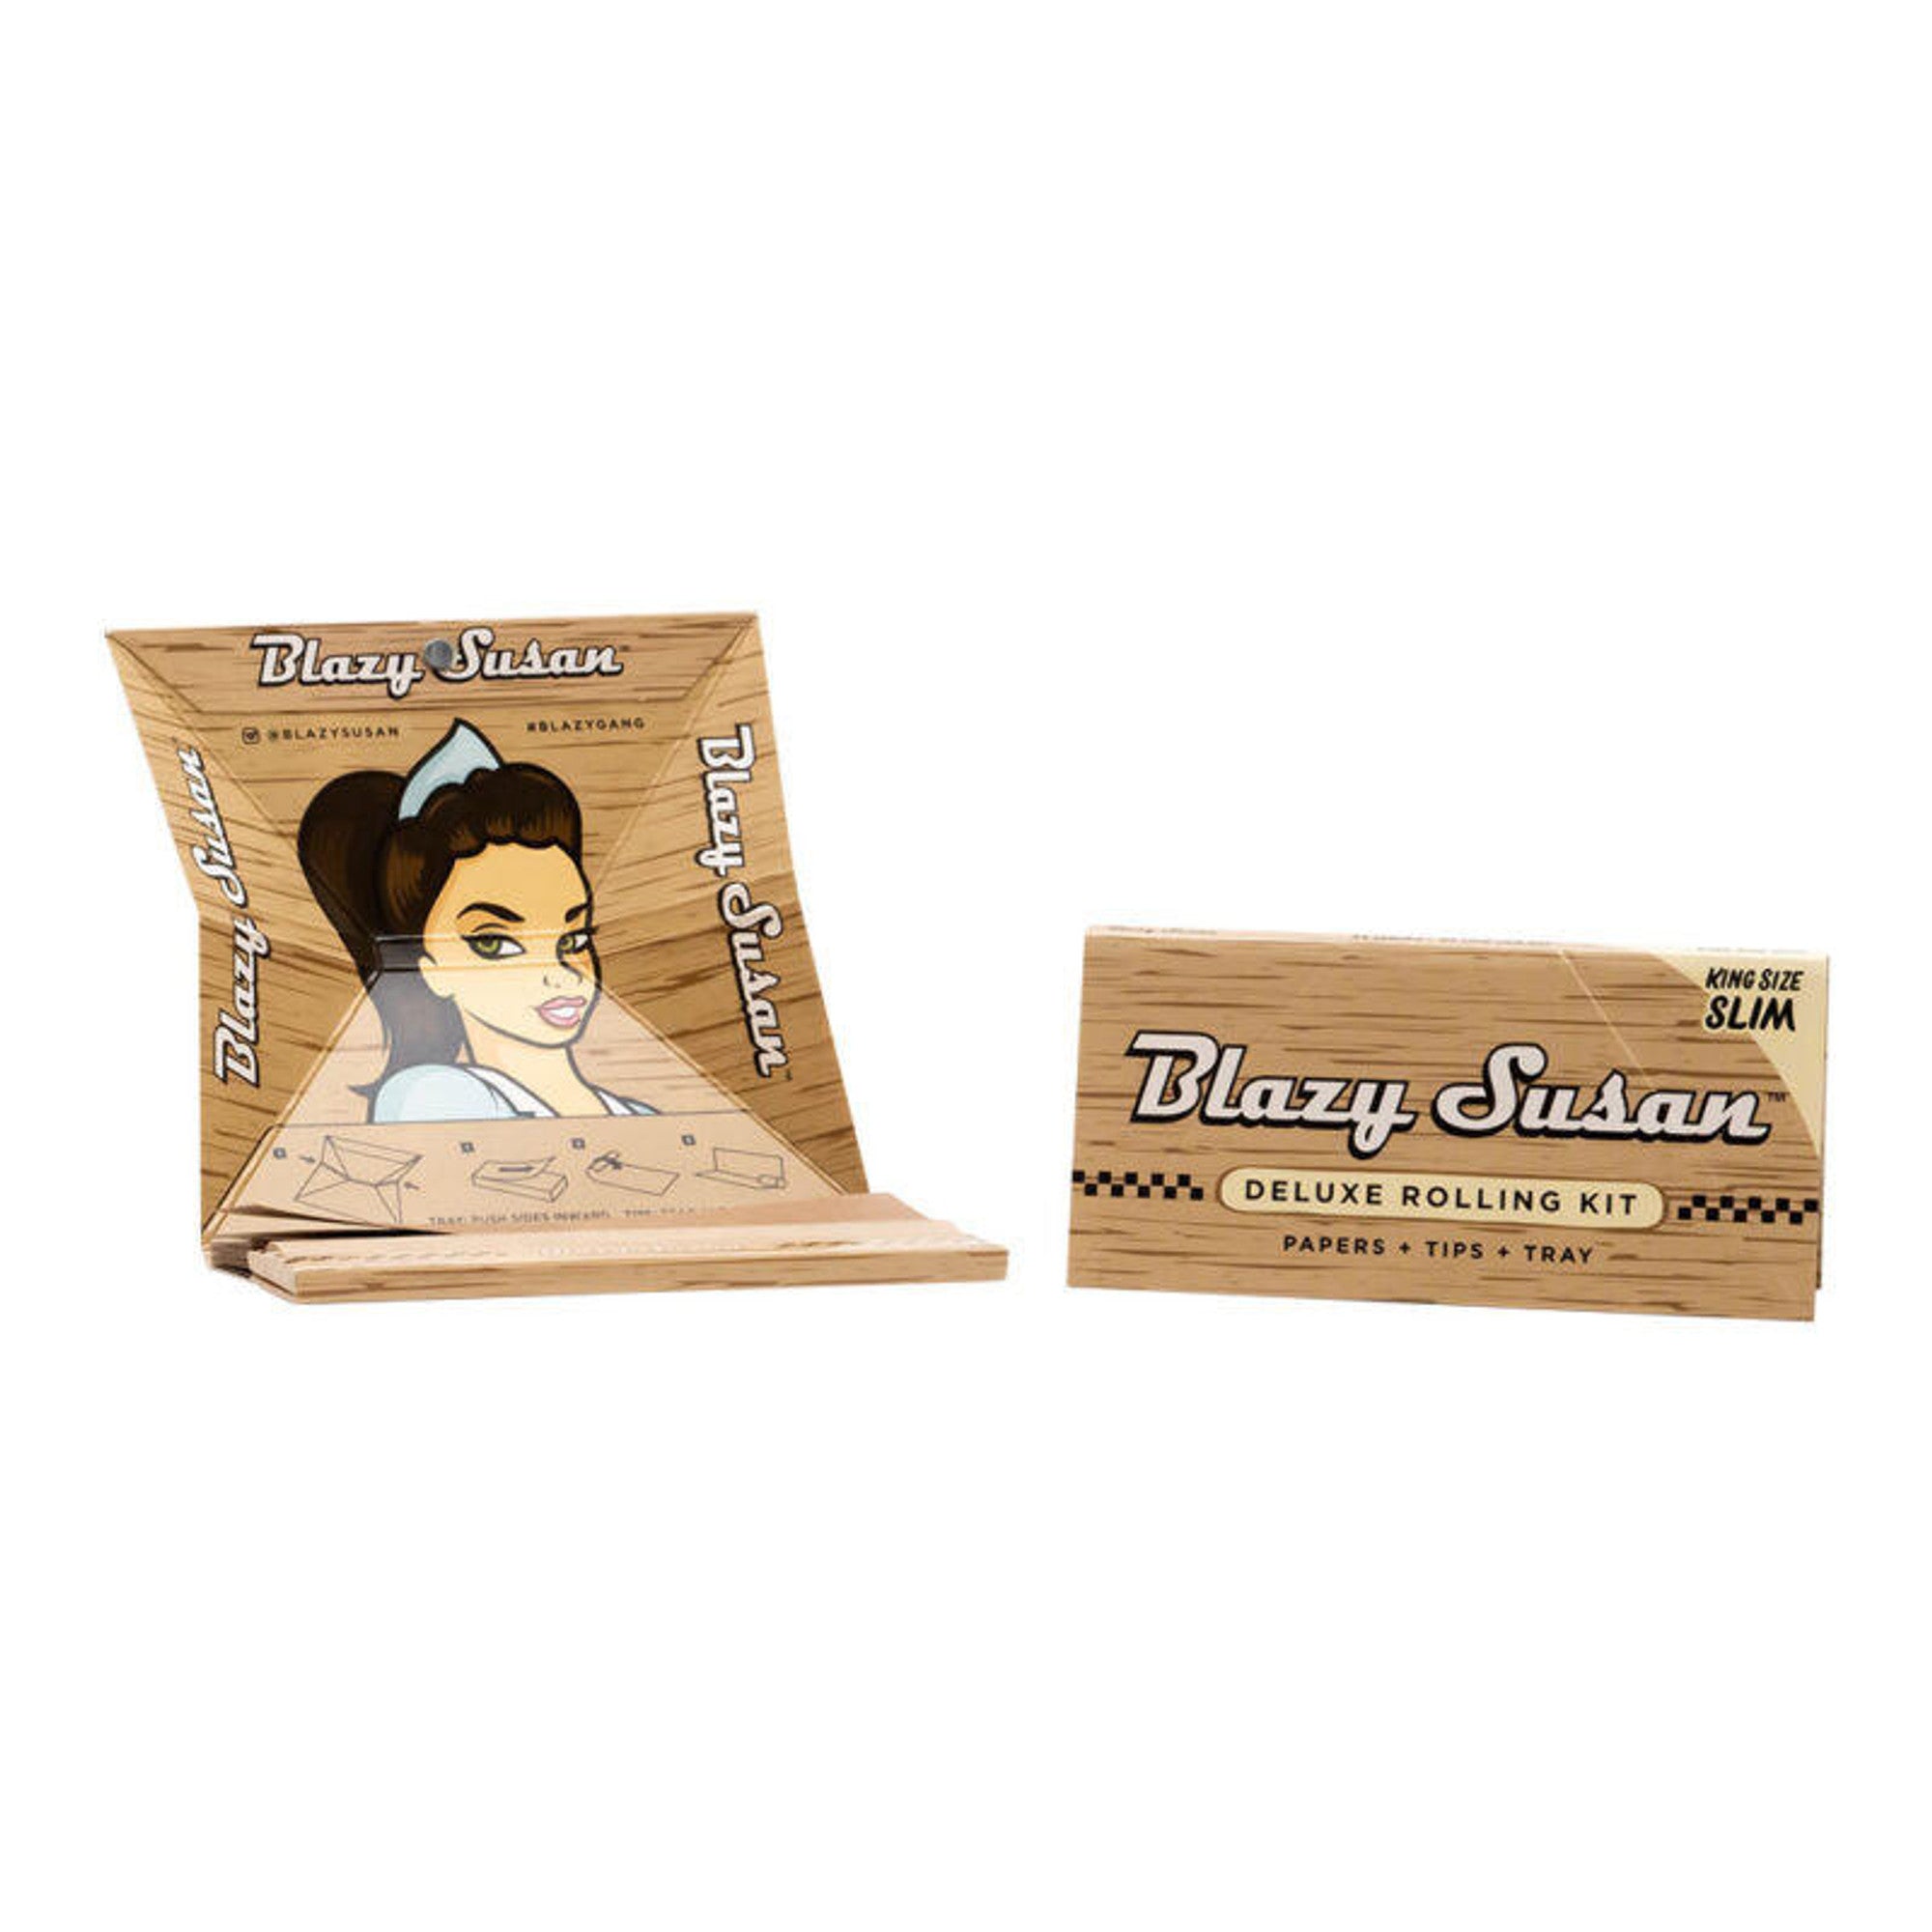 BLAZY SUSAN UNBLEACHED KING SIZE DELUXE ROLLING KIT